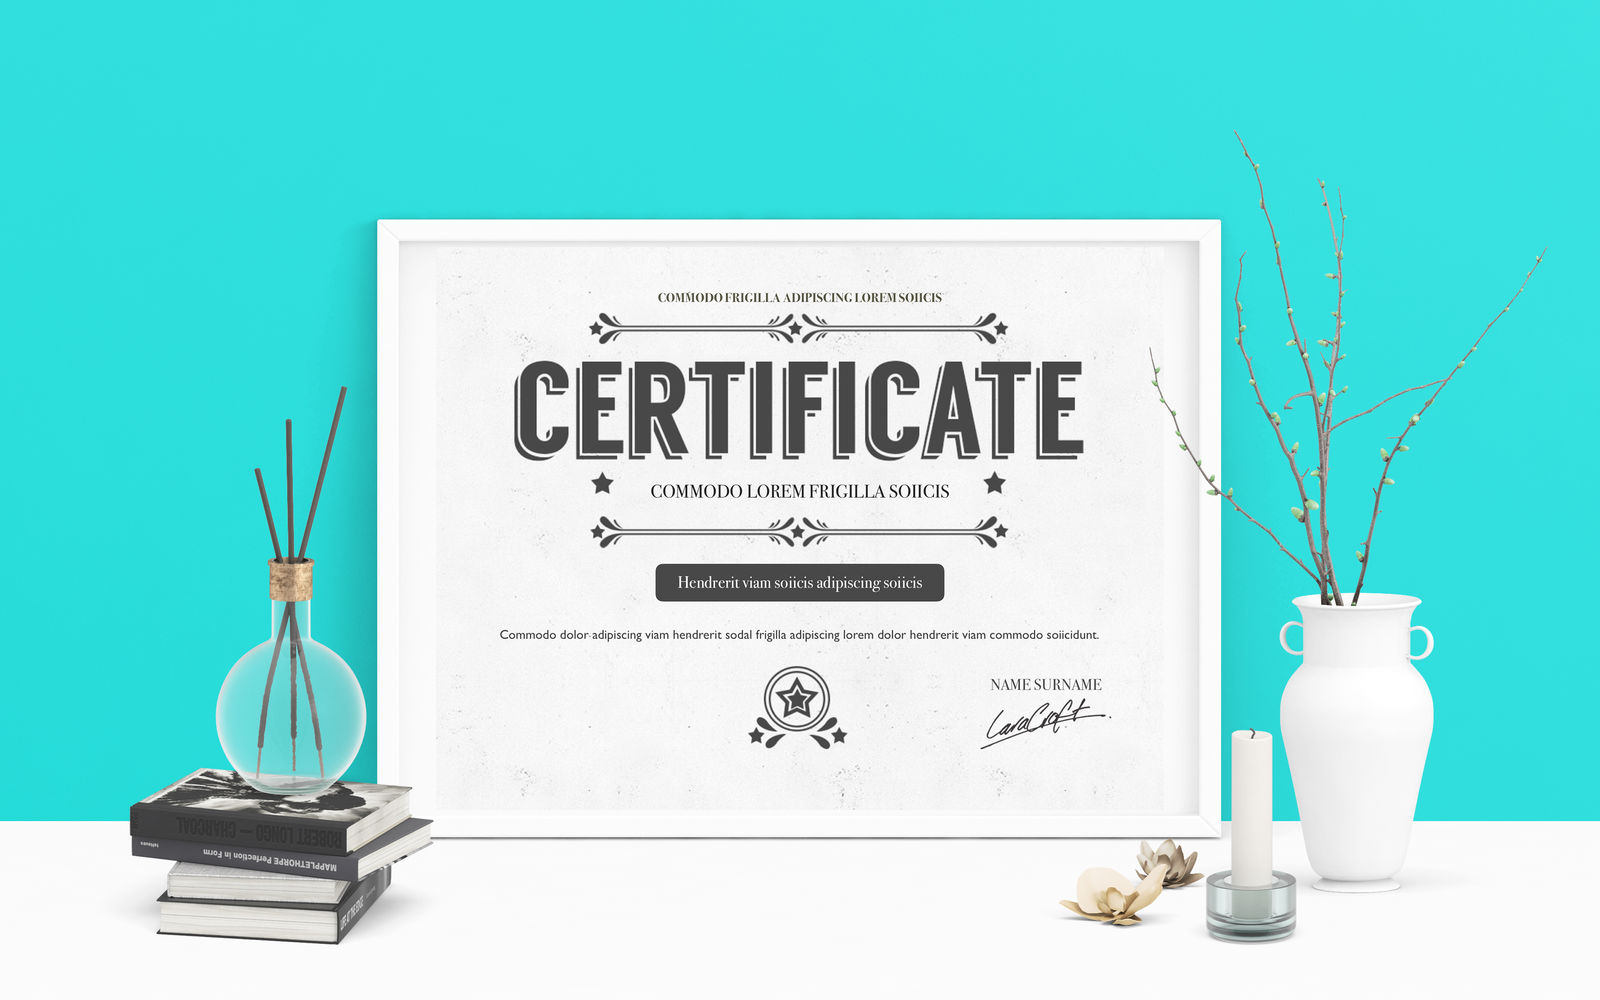 Certificate Templates - DesiGN 2.0.1 for Mac|Mac版下载 | Pages 证书模板合集